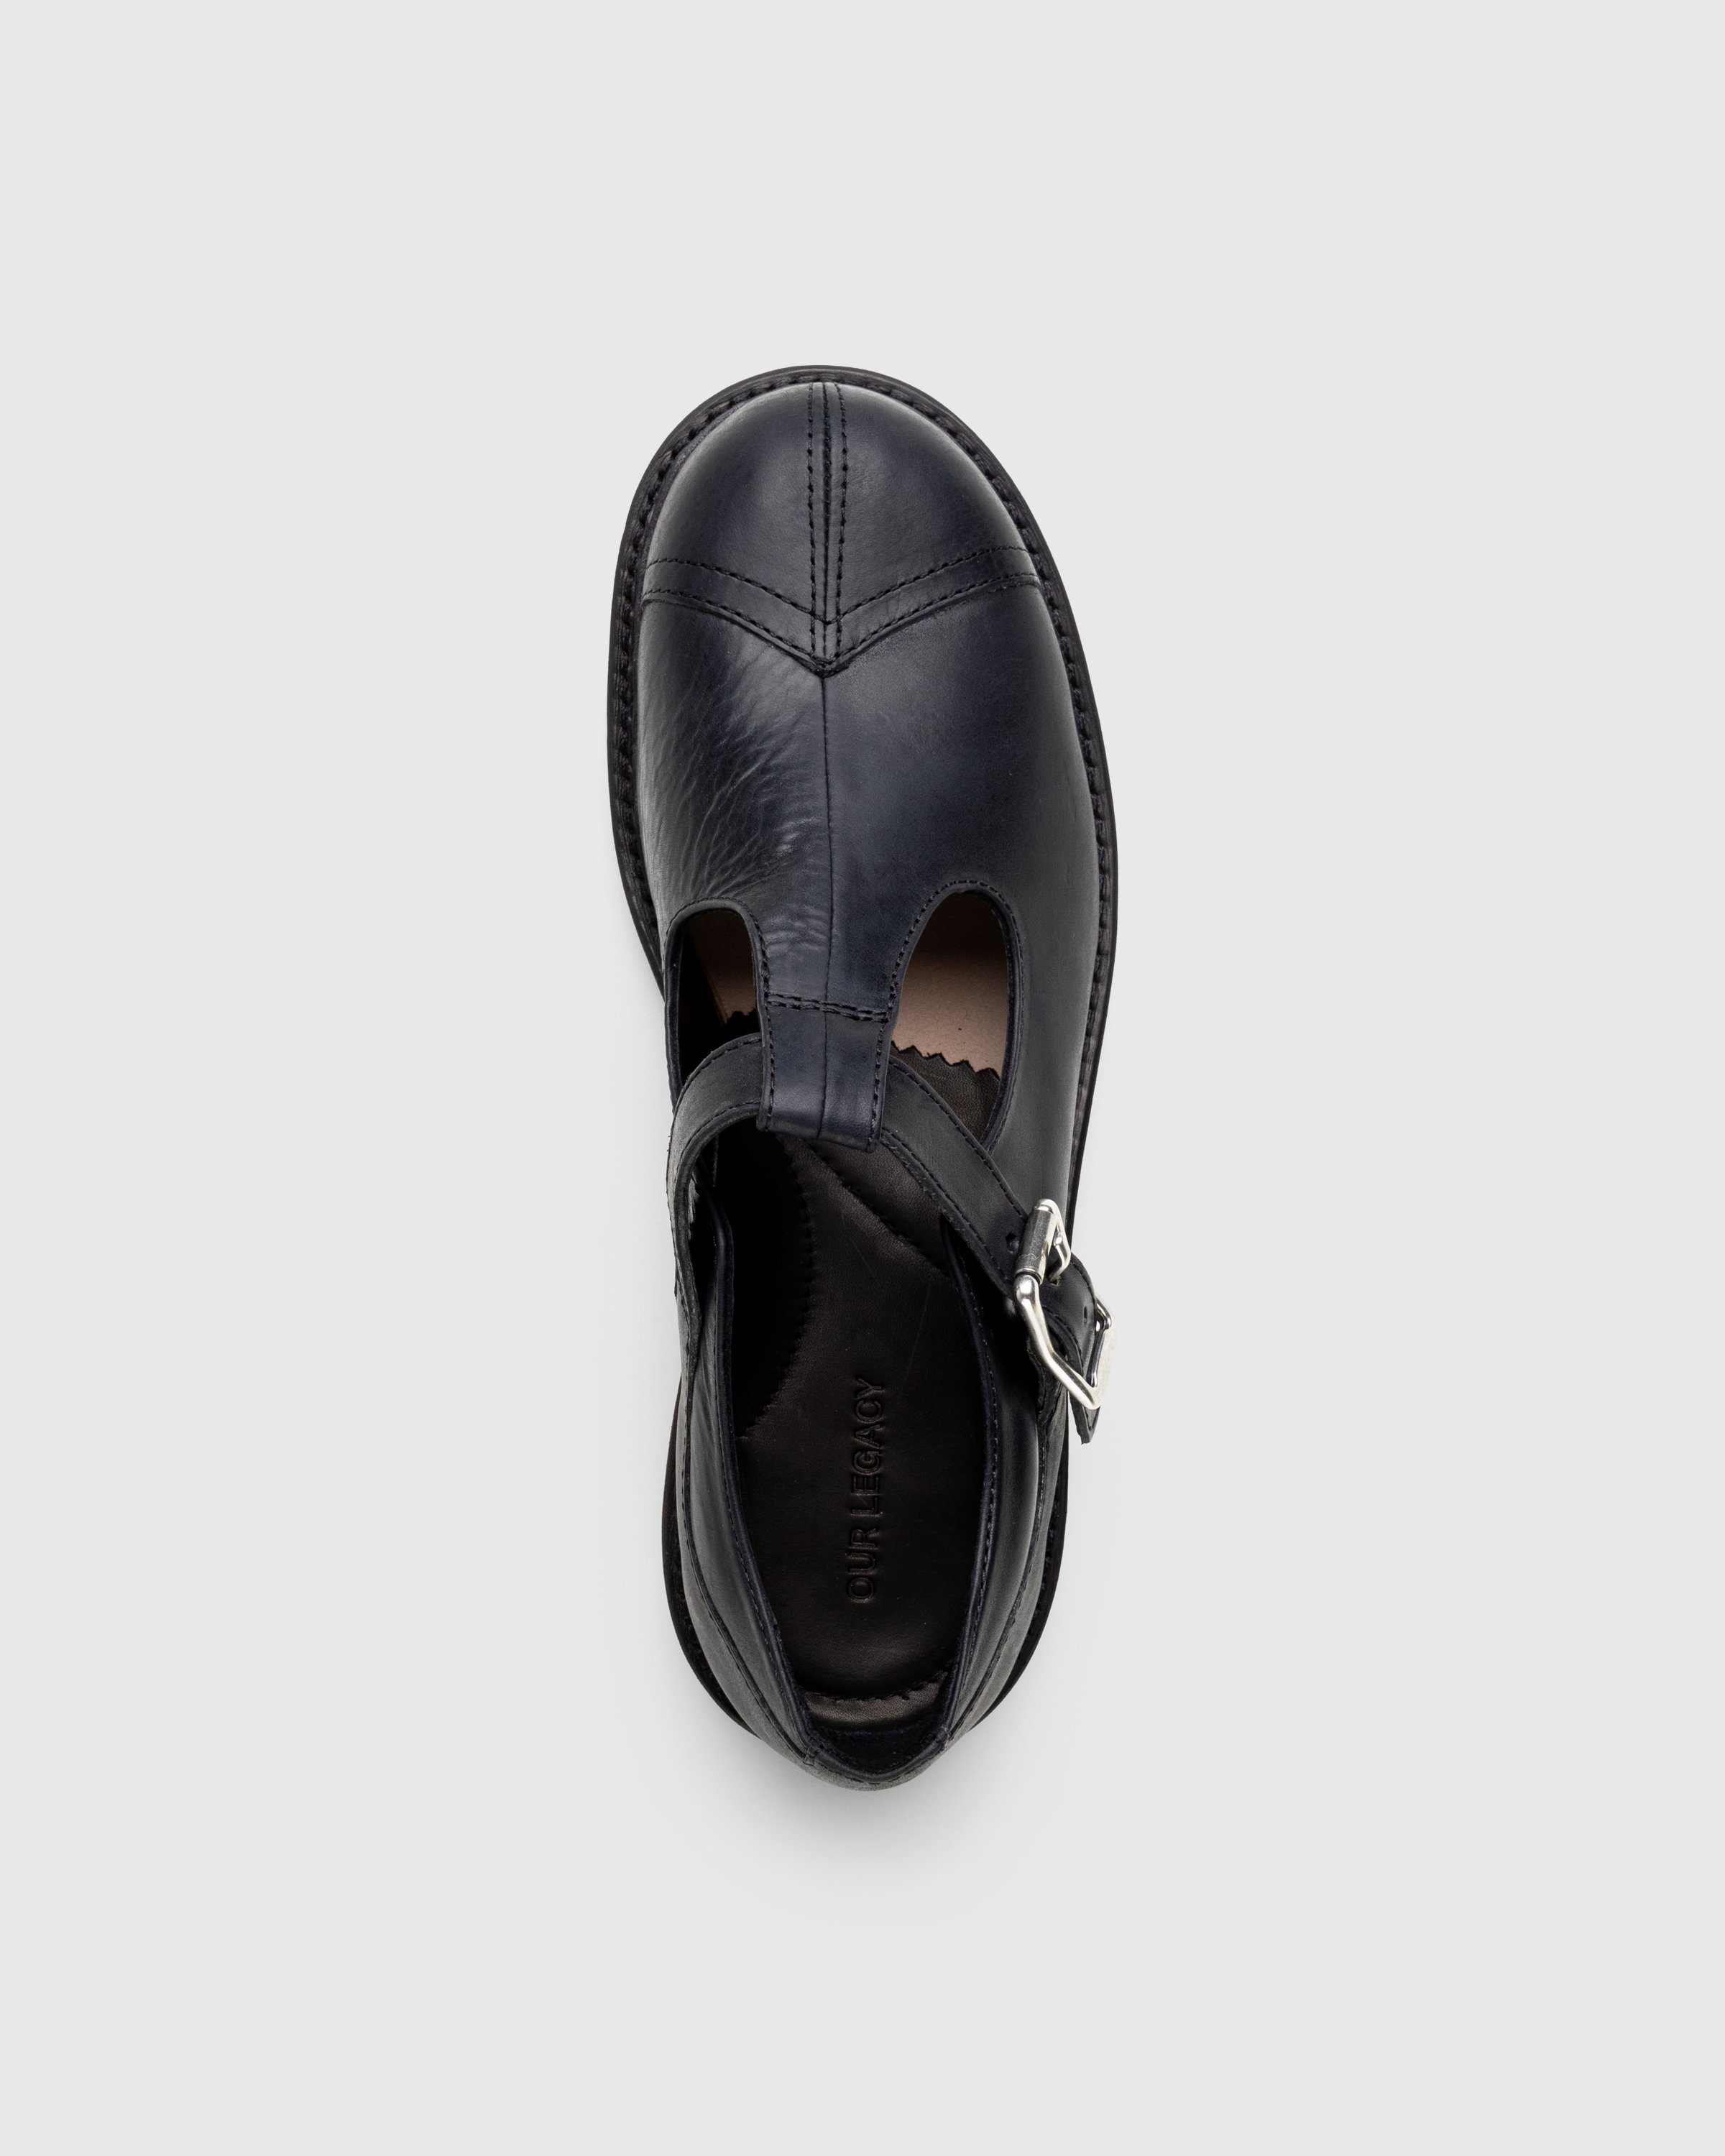 Our Legacy - Camden Shoe Car Tire Black Leather - Footwear - Black - Image 5